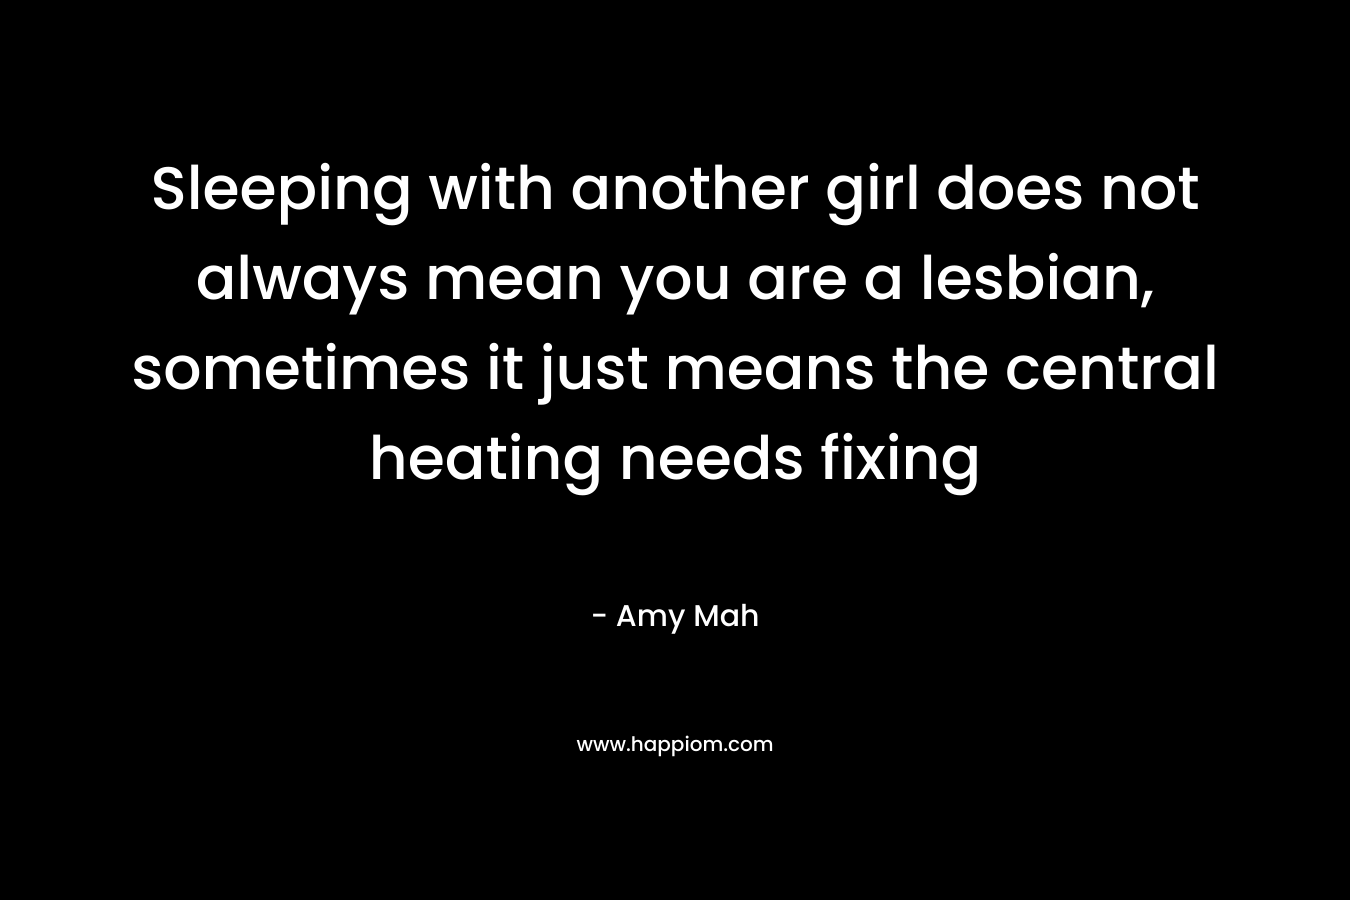 Sleeping with another girl does not always mean you are a lesbian, sometimes it just means the central heating needs fixing – Amy Mah